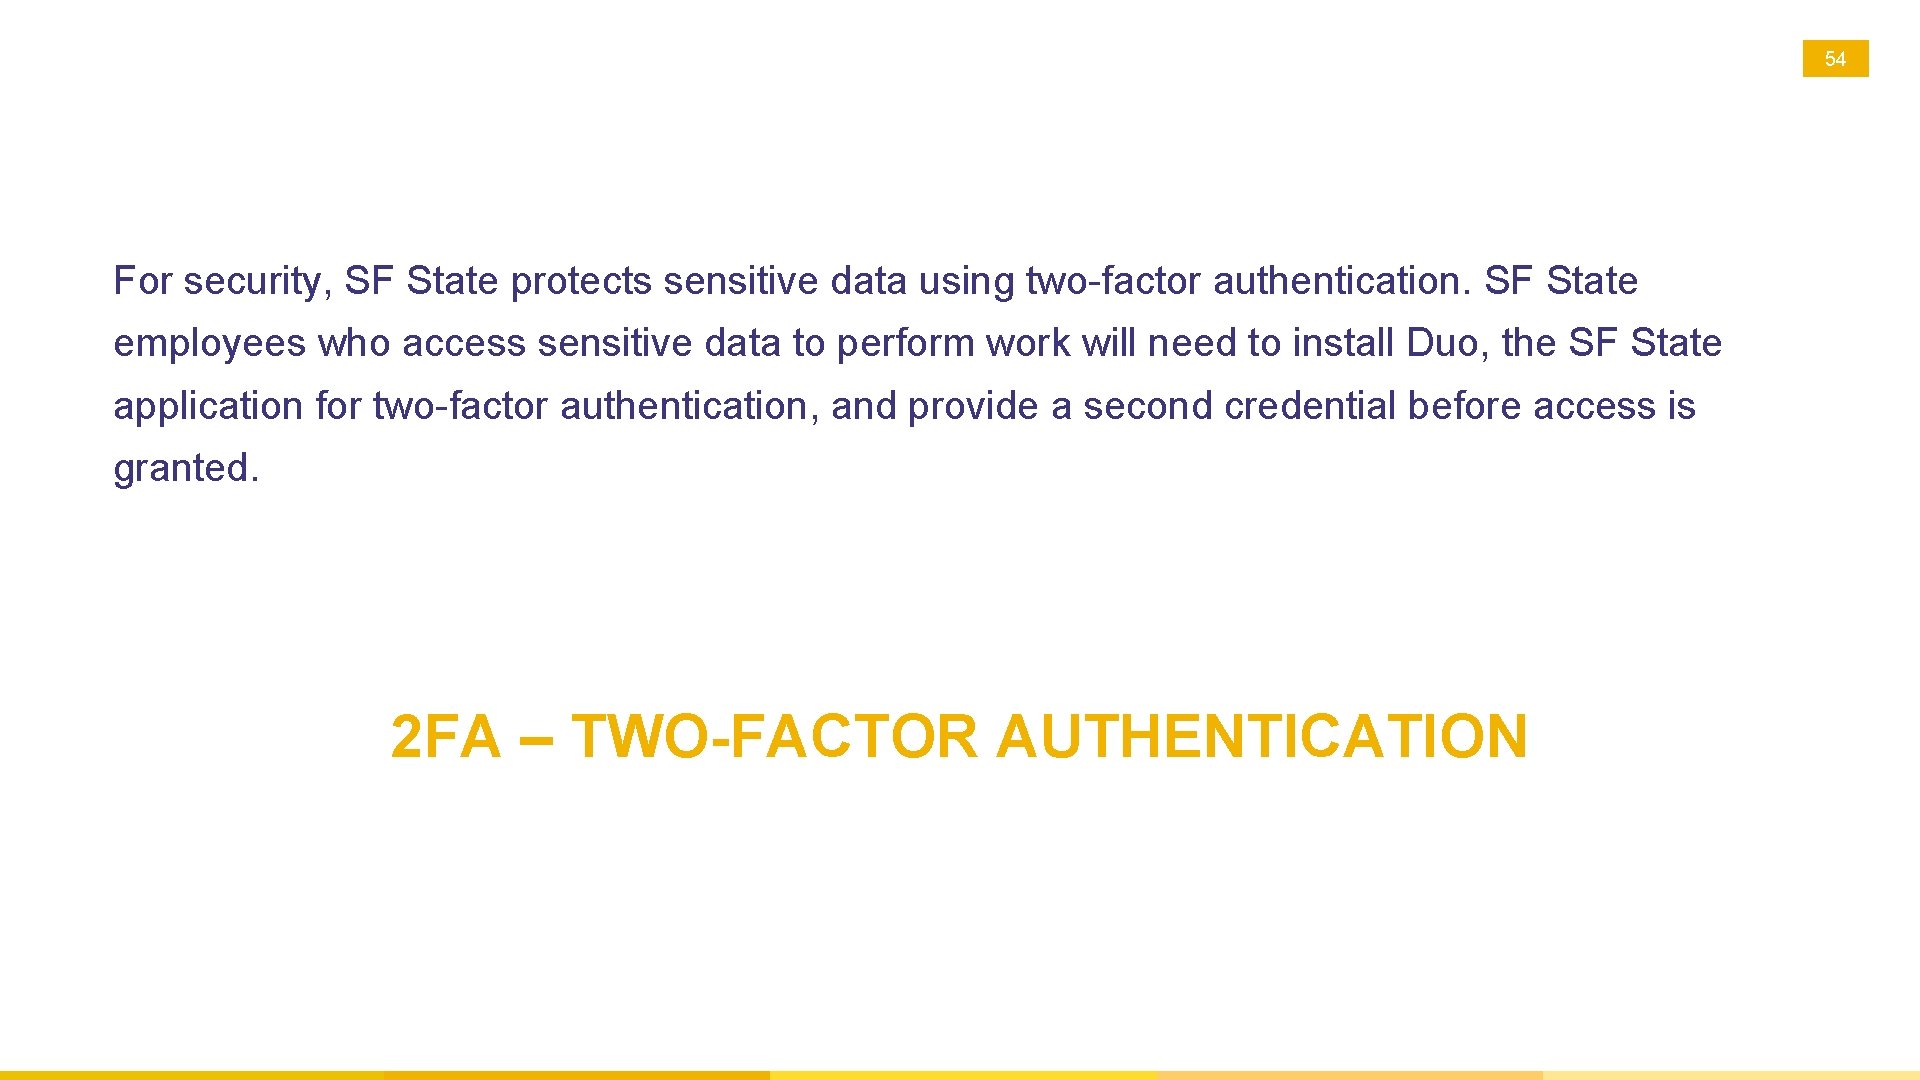 54 For security, SF State protects sensitive data using two-factor authentication. SF State employees